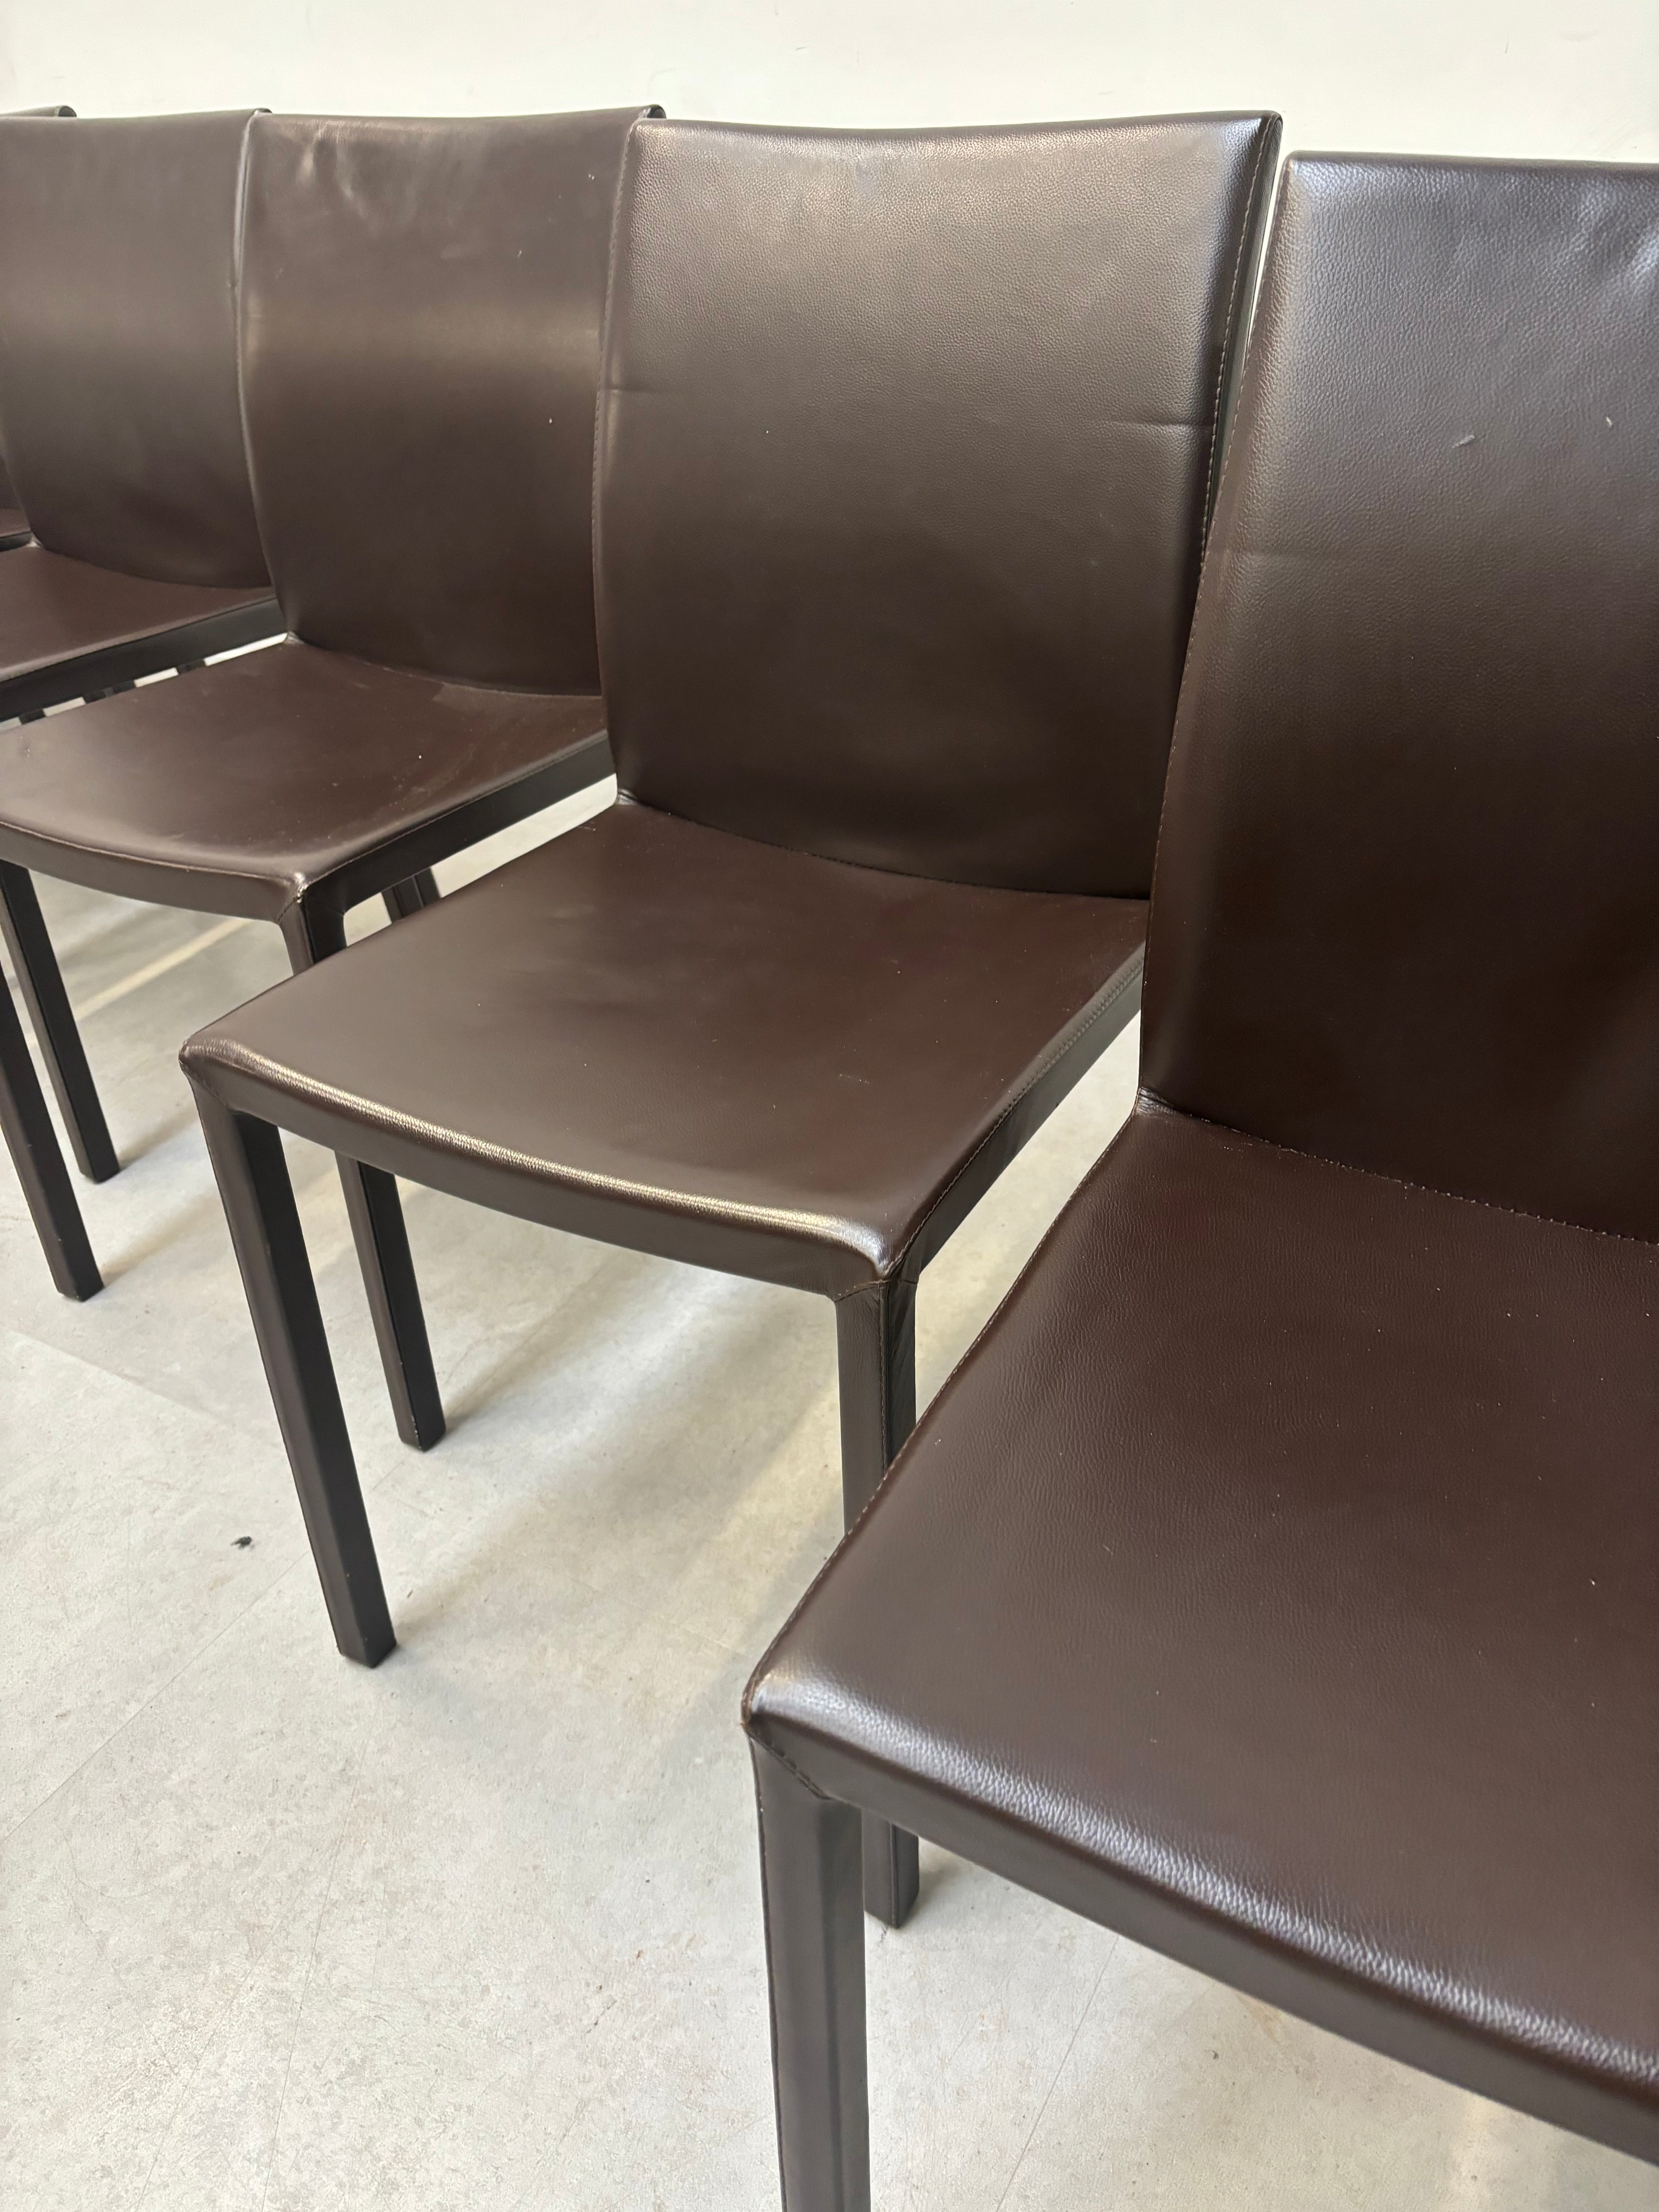 Set of 8 all leather brown dining chairs